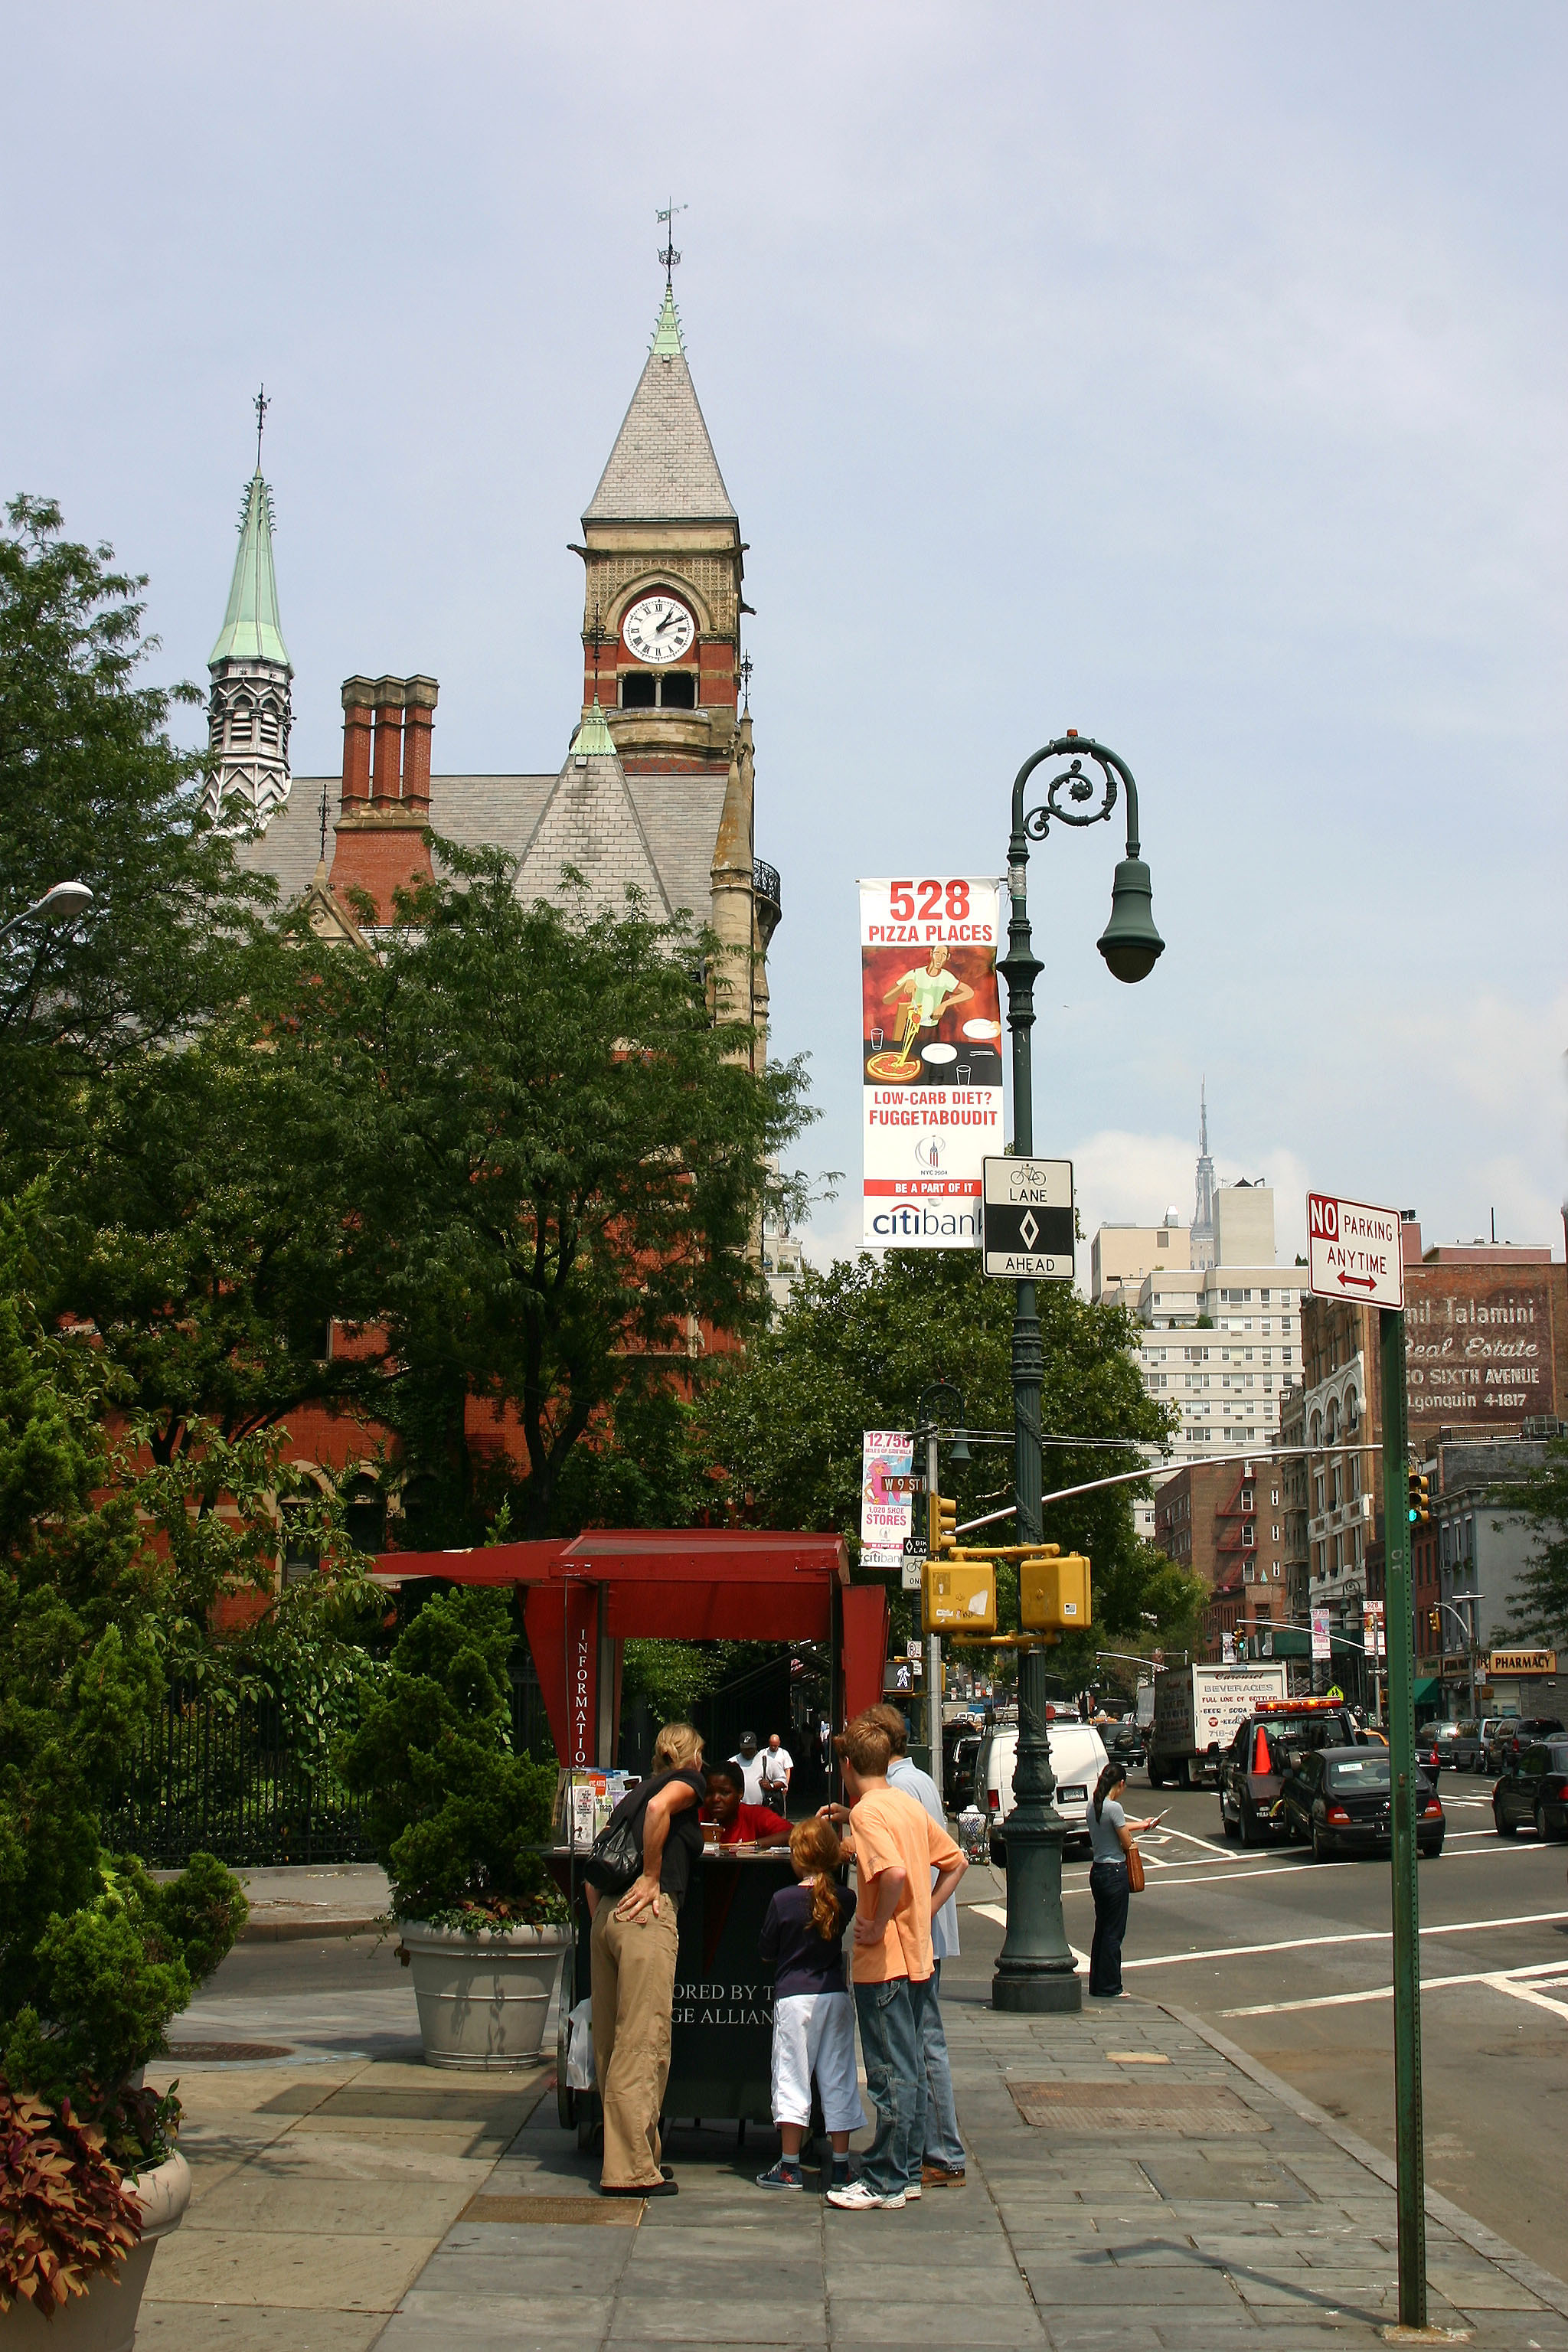 North View from Tourist Information Booth on Sixth Avenue at 8th Street